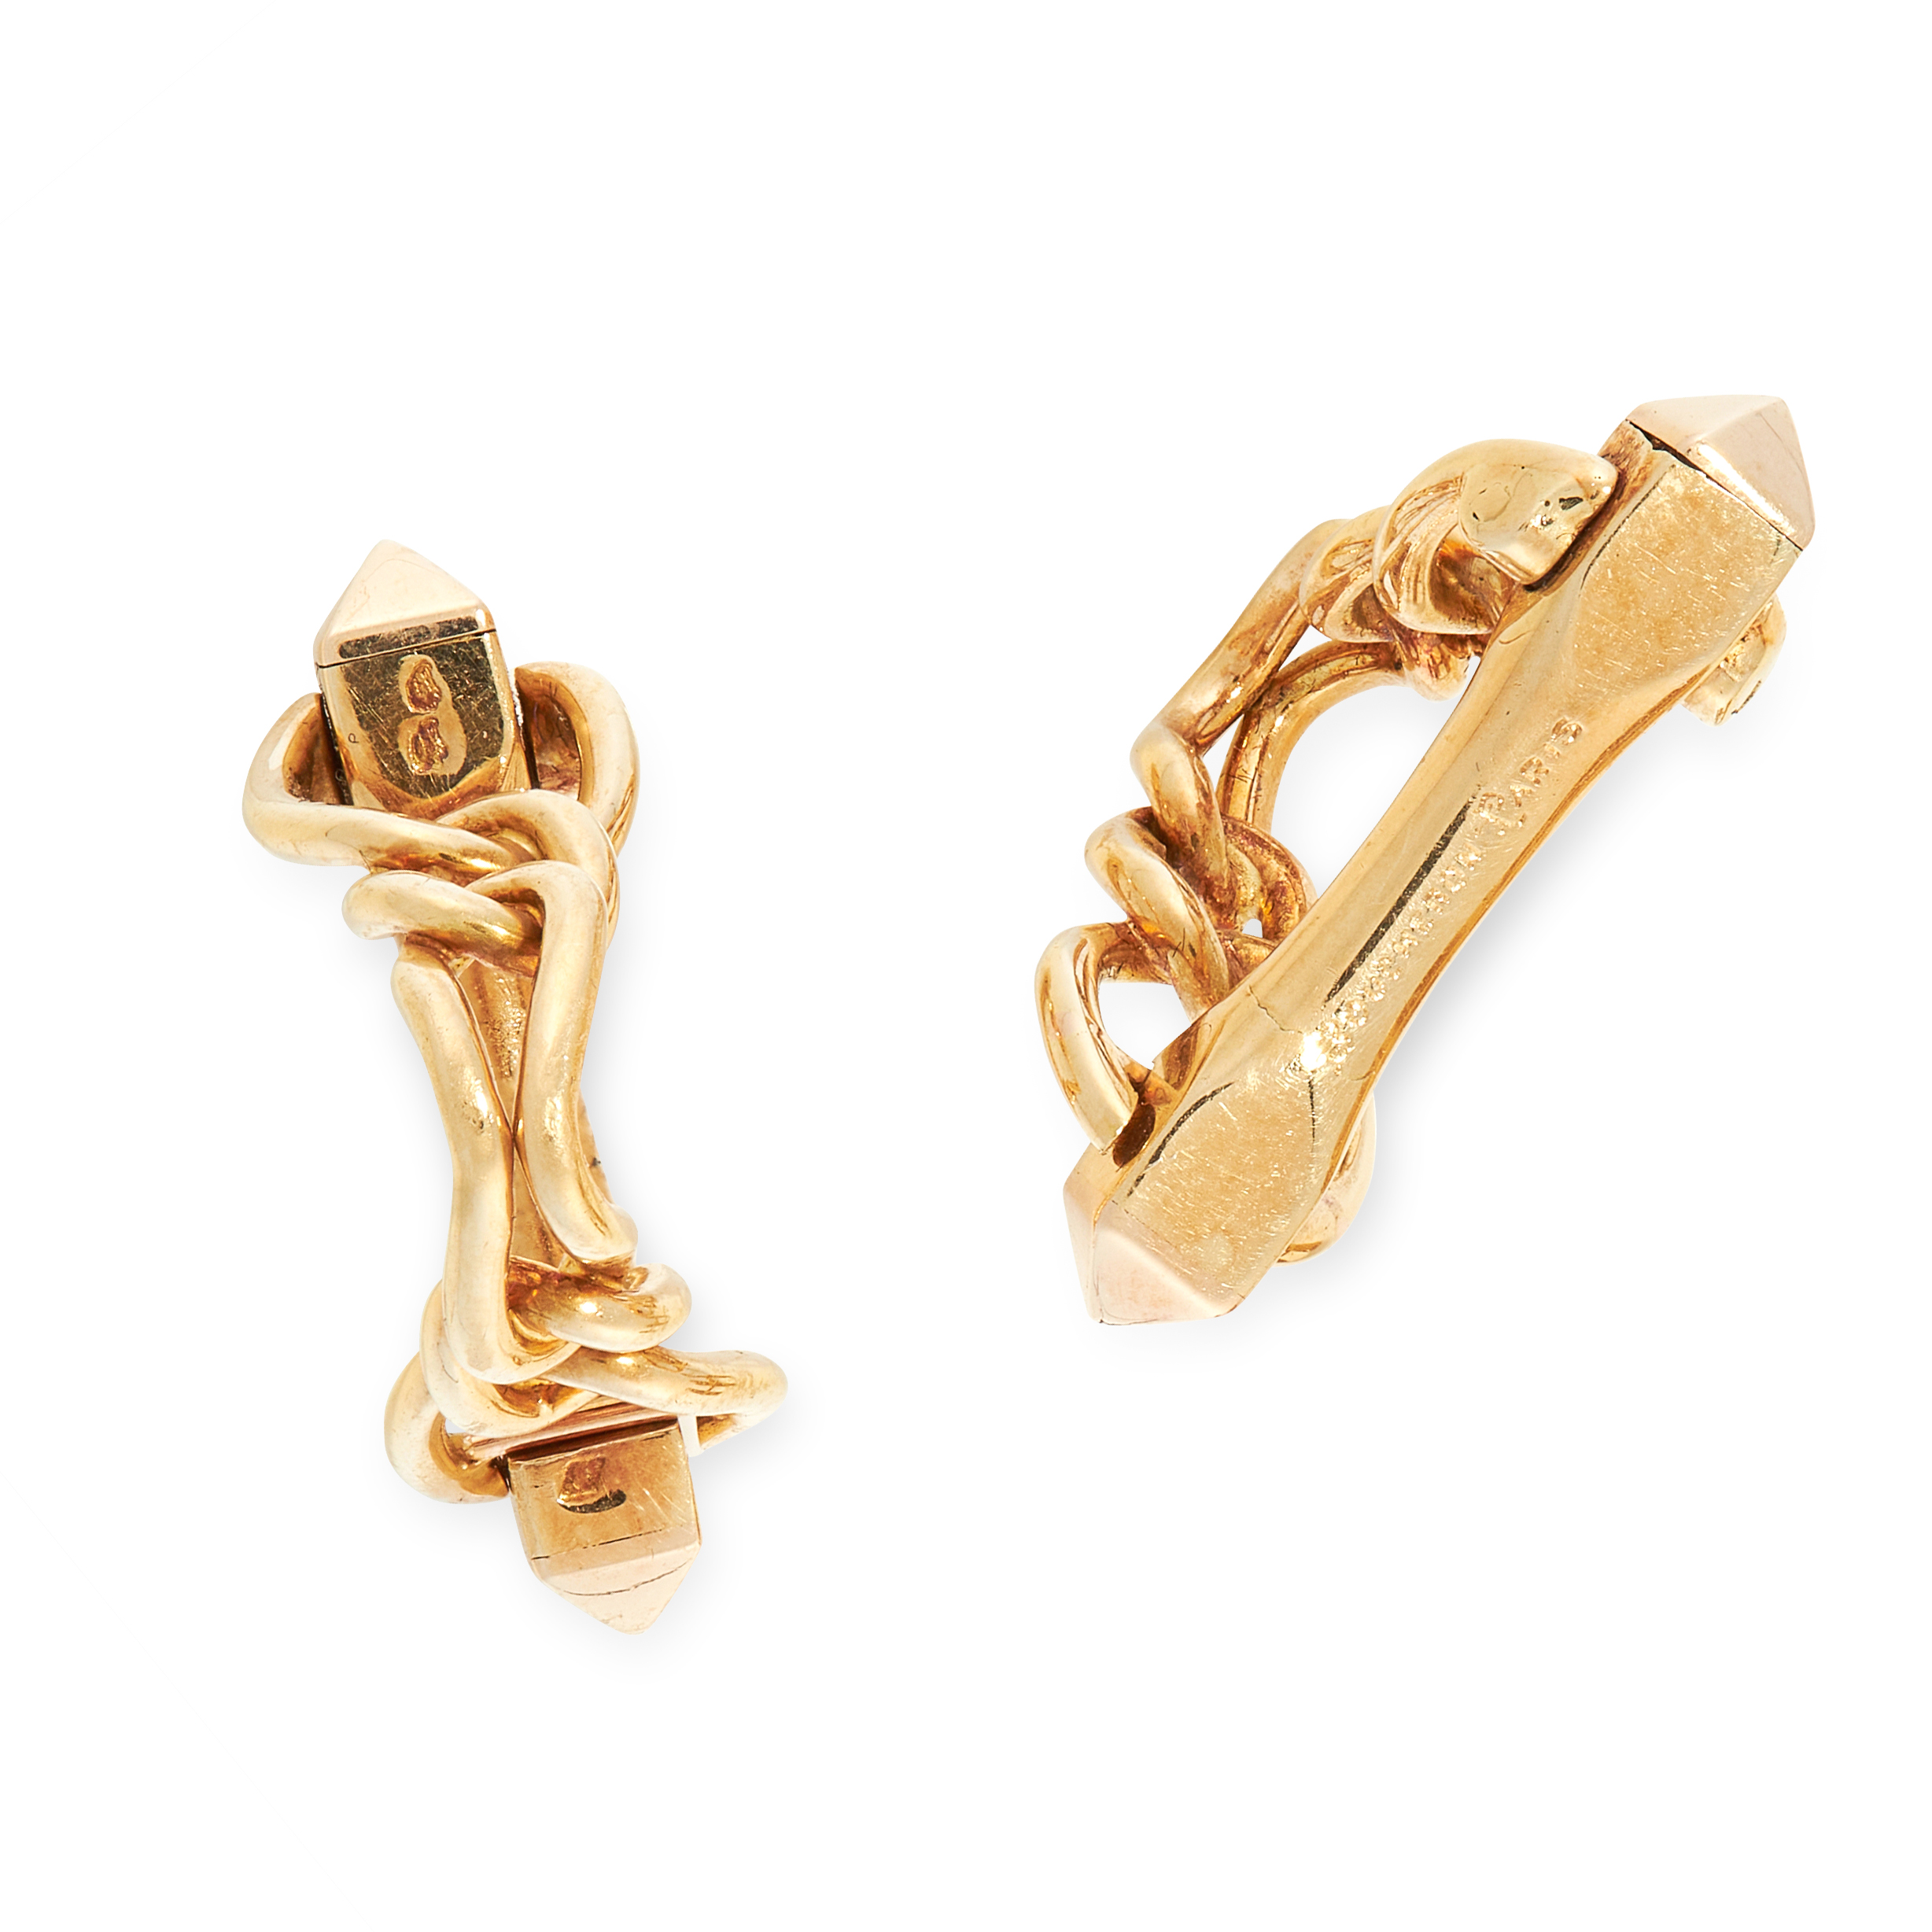 A PAIR OF VINTAGE CUFFLINKS, BOUCHERON in 18ct yellow gold, each designed as a stirrup formed of - Image 3 of 3